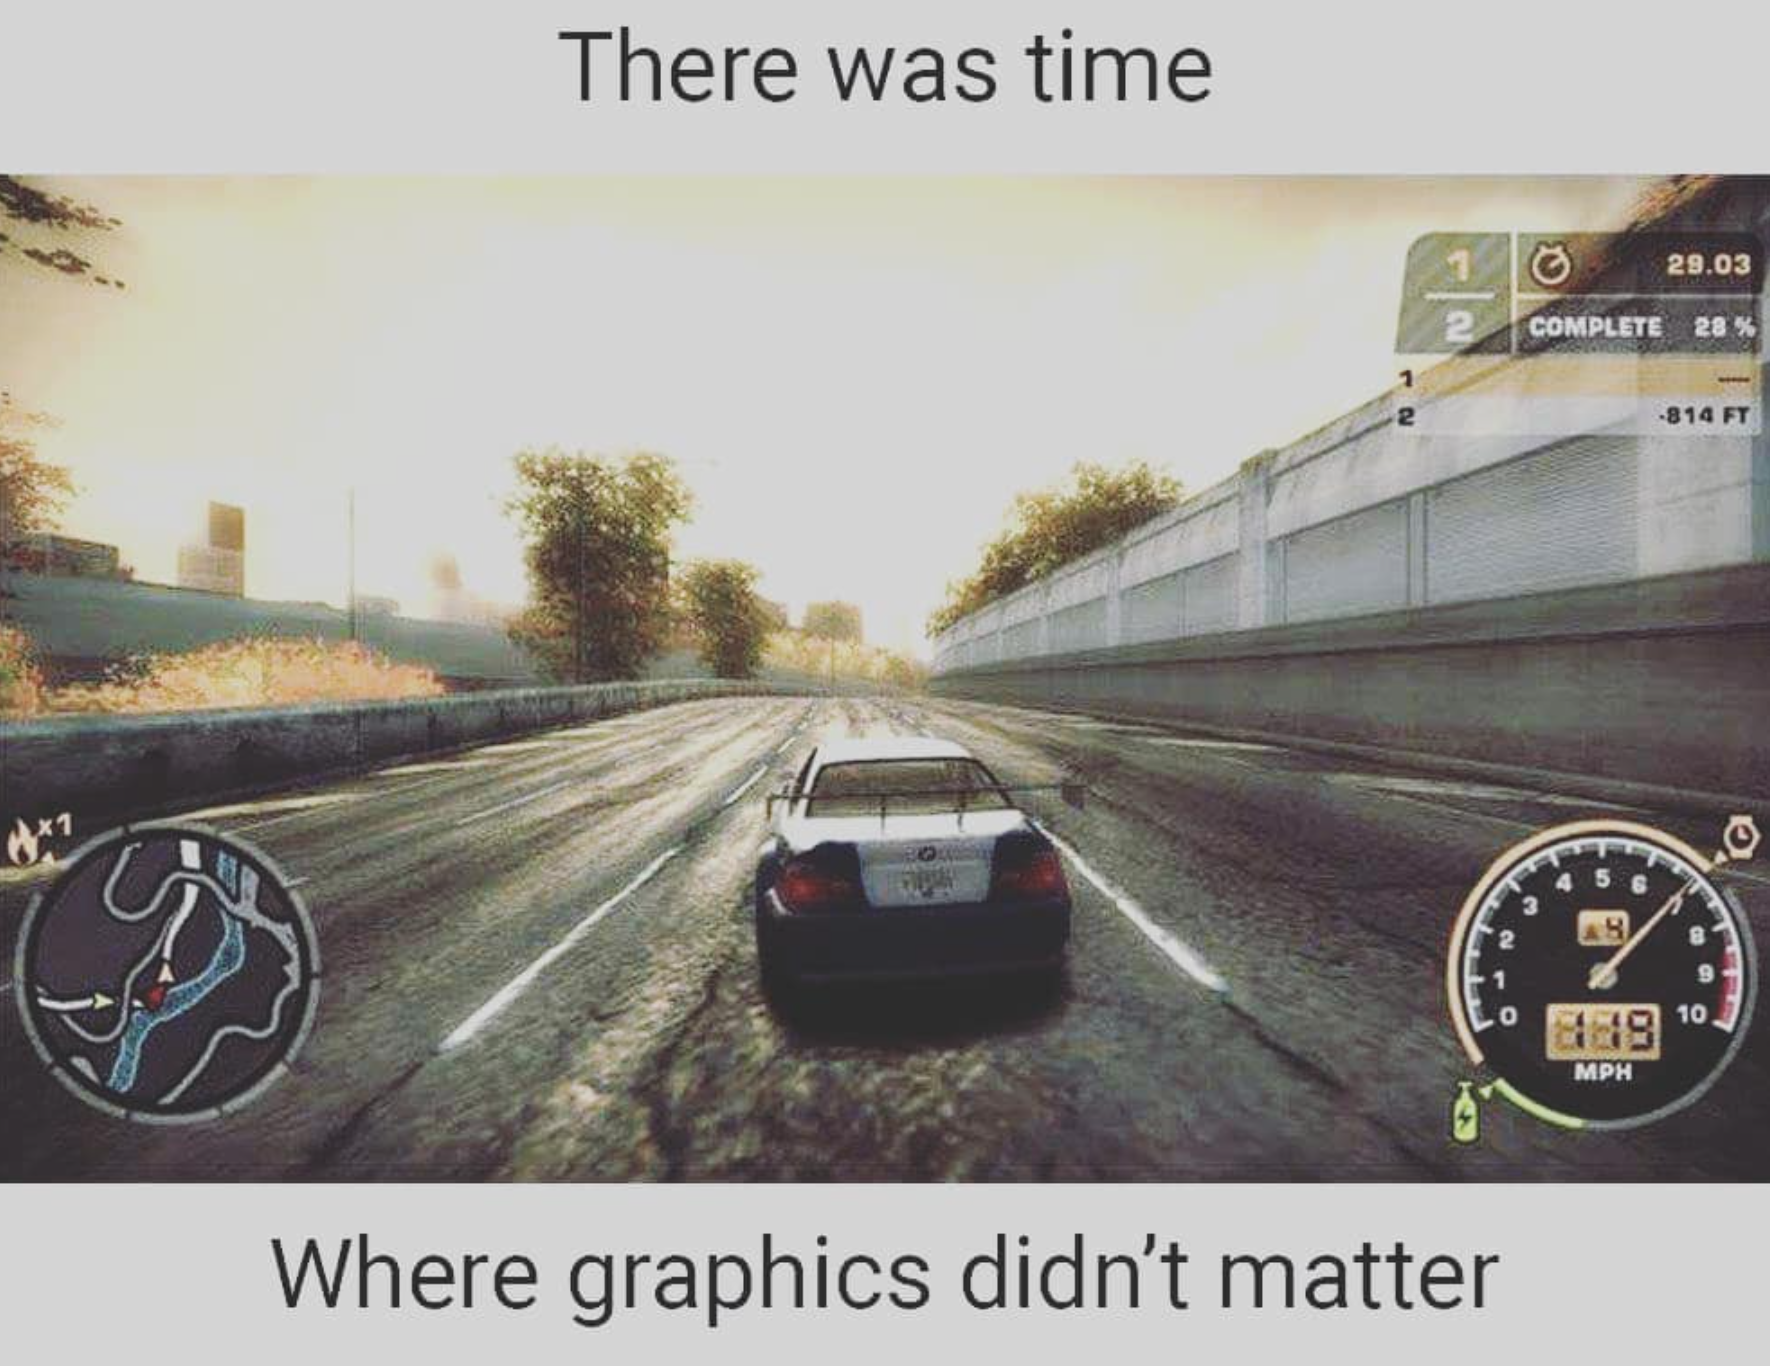 video game memes - asphalt - There was time 29.03 Complete 20% 814 Ft 5g @ 10 6189 Mph Where graphics didn't matter